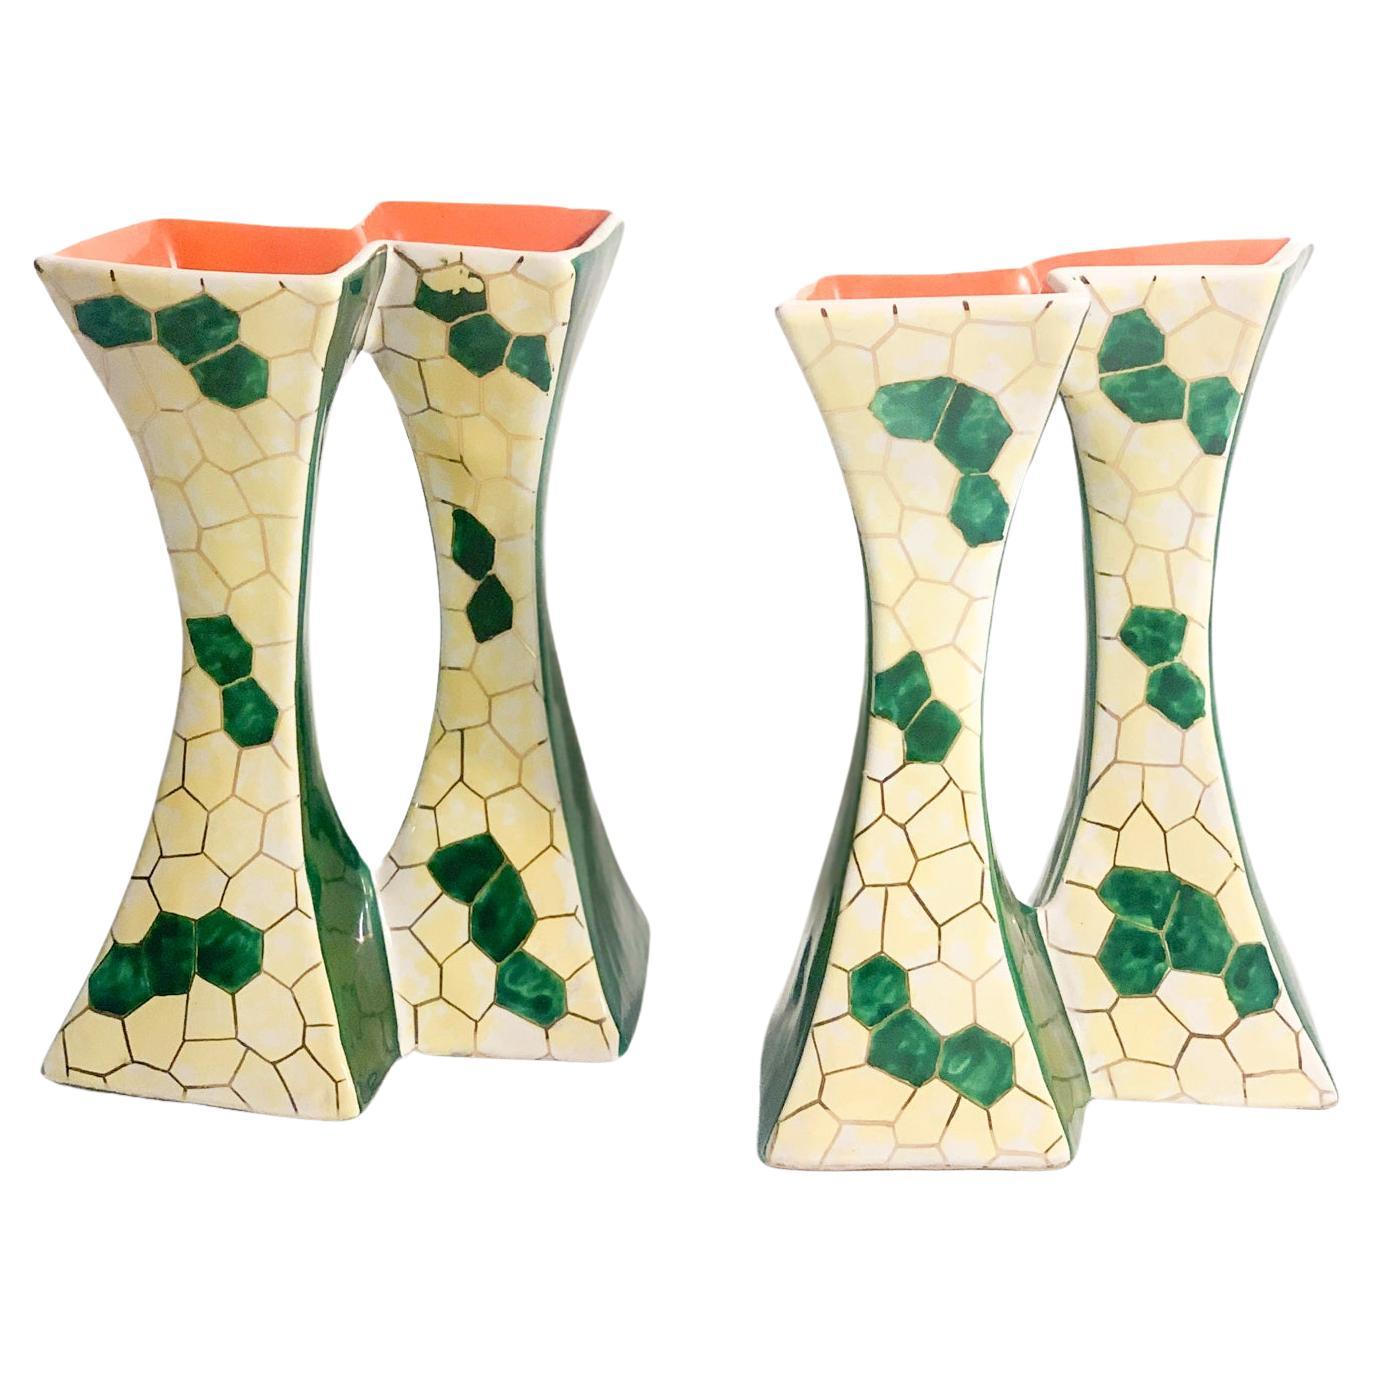 Pair of Italian Ceramic Candle Holders by Pucci Umbertide from the 1950s